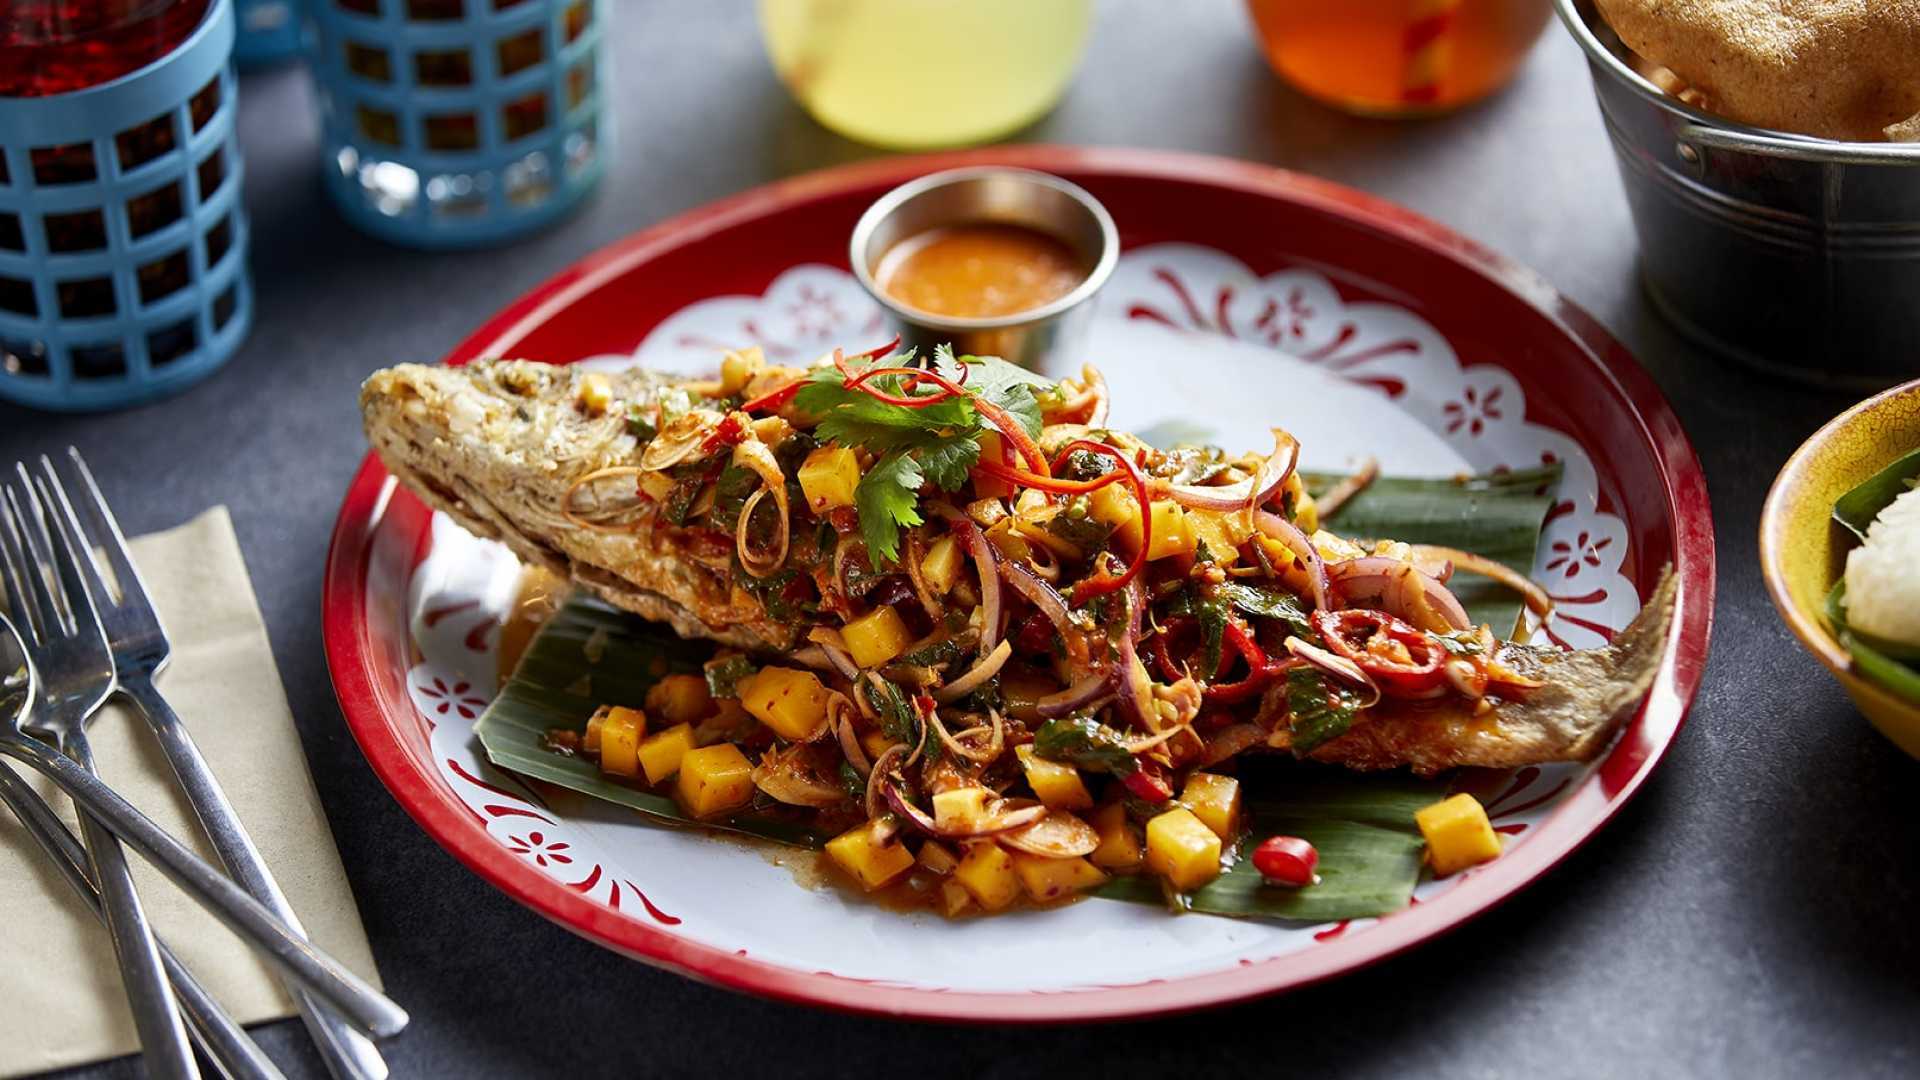 This is an image of a sea bass dish from Rosa's Thai's Isaan menu